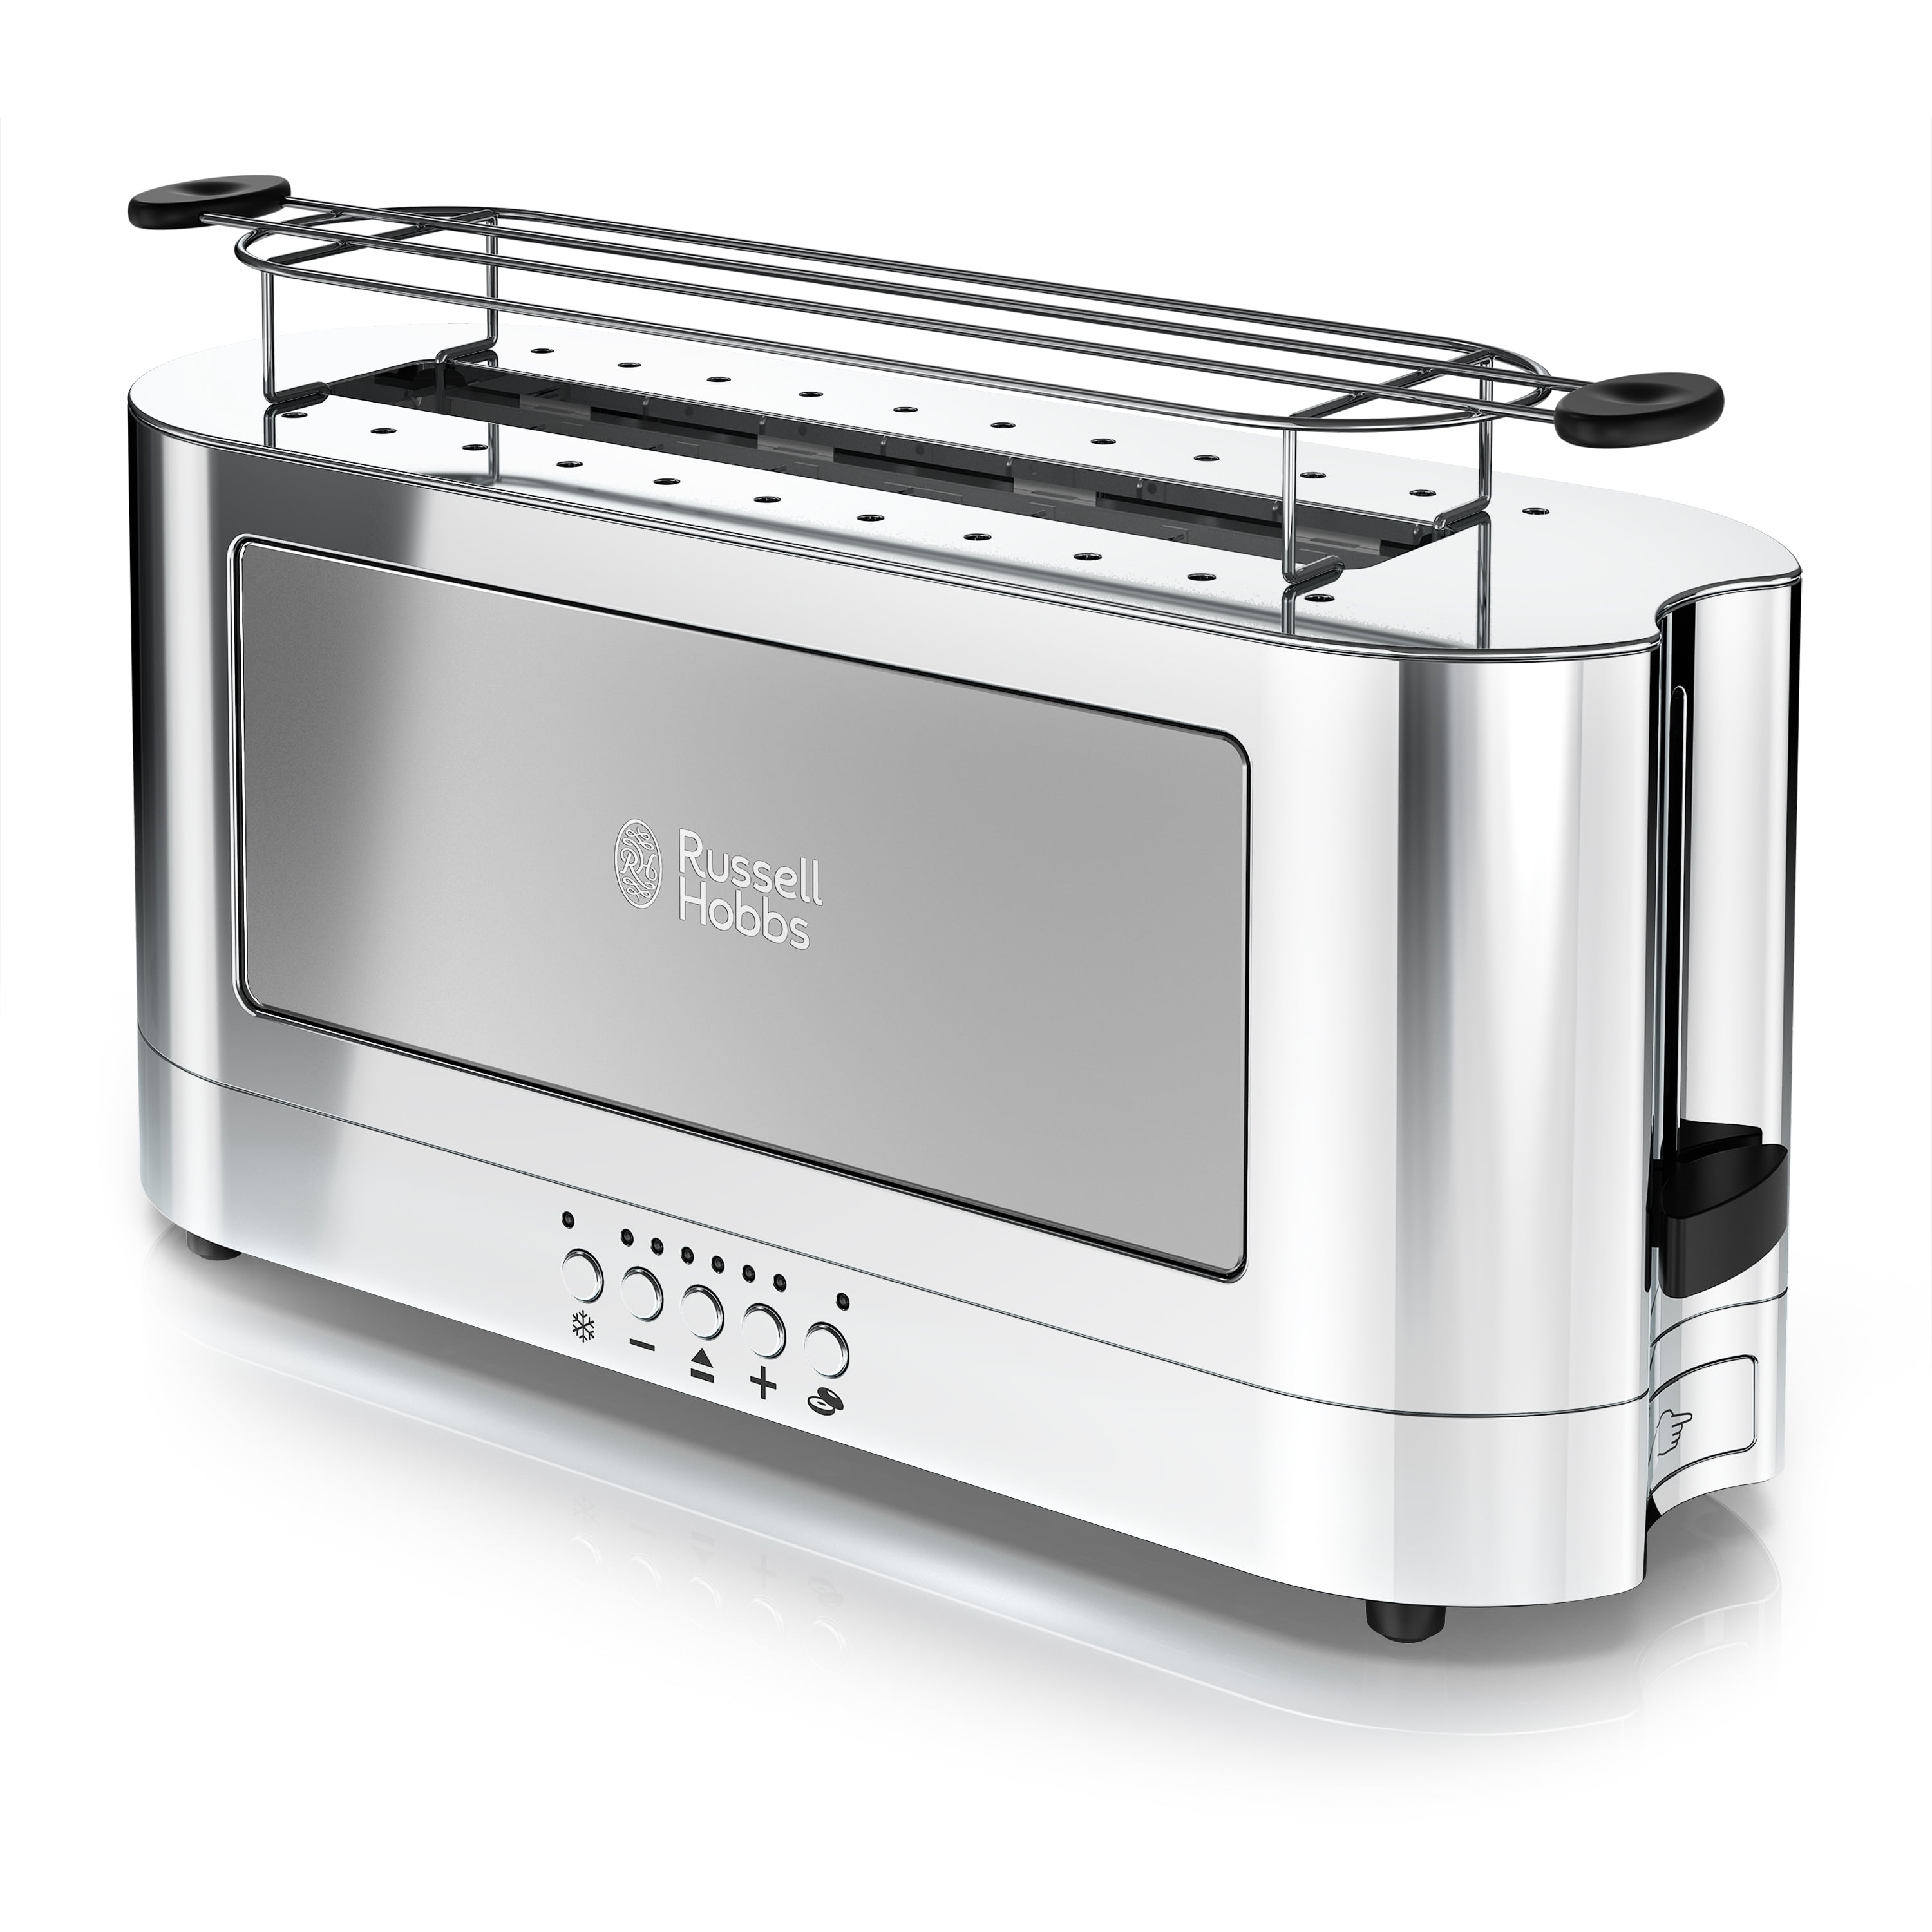 2-Slice TRL9300GYR Toaster, Hobbs Accent Silver, Long Glass Russell